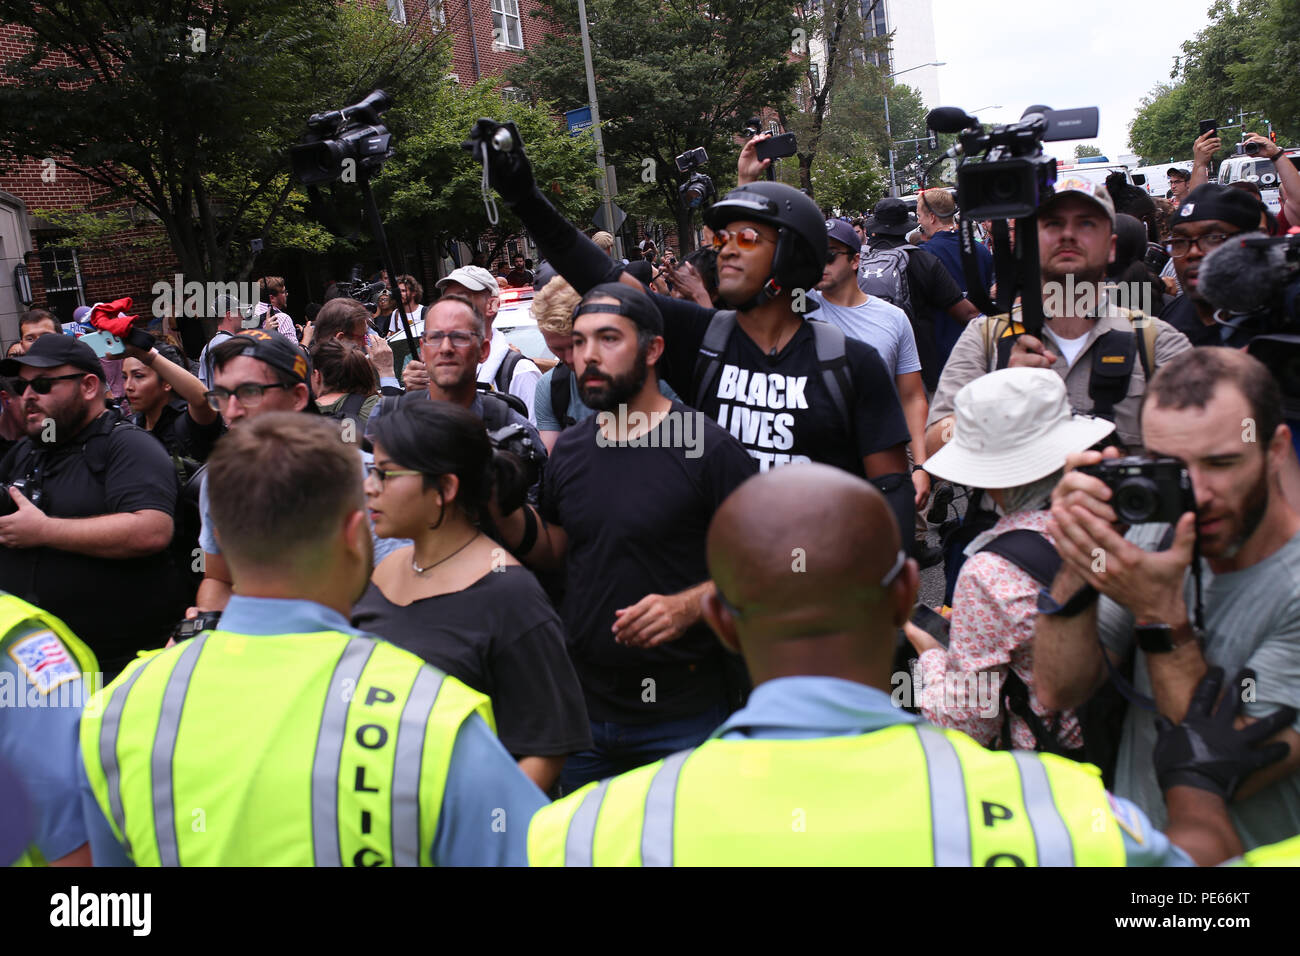 Washington, DC, USA. 12 Aug 2018. Counterprotestors at the Unite the Right protest march in front of the police escort. Credit: Joseph Gruber/Alamy Live News Stock Photo